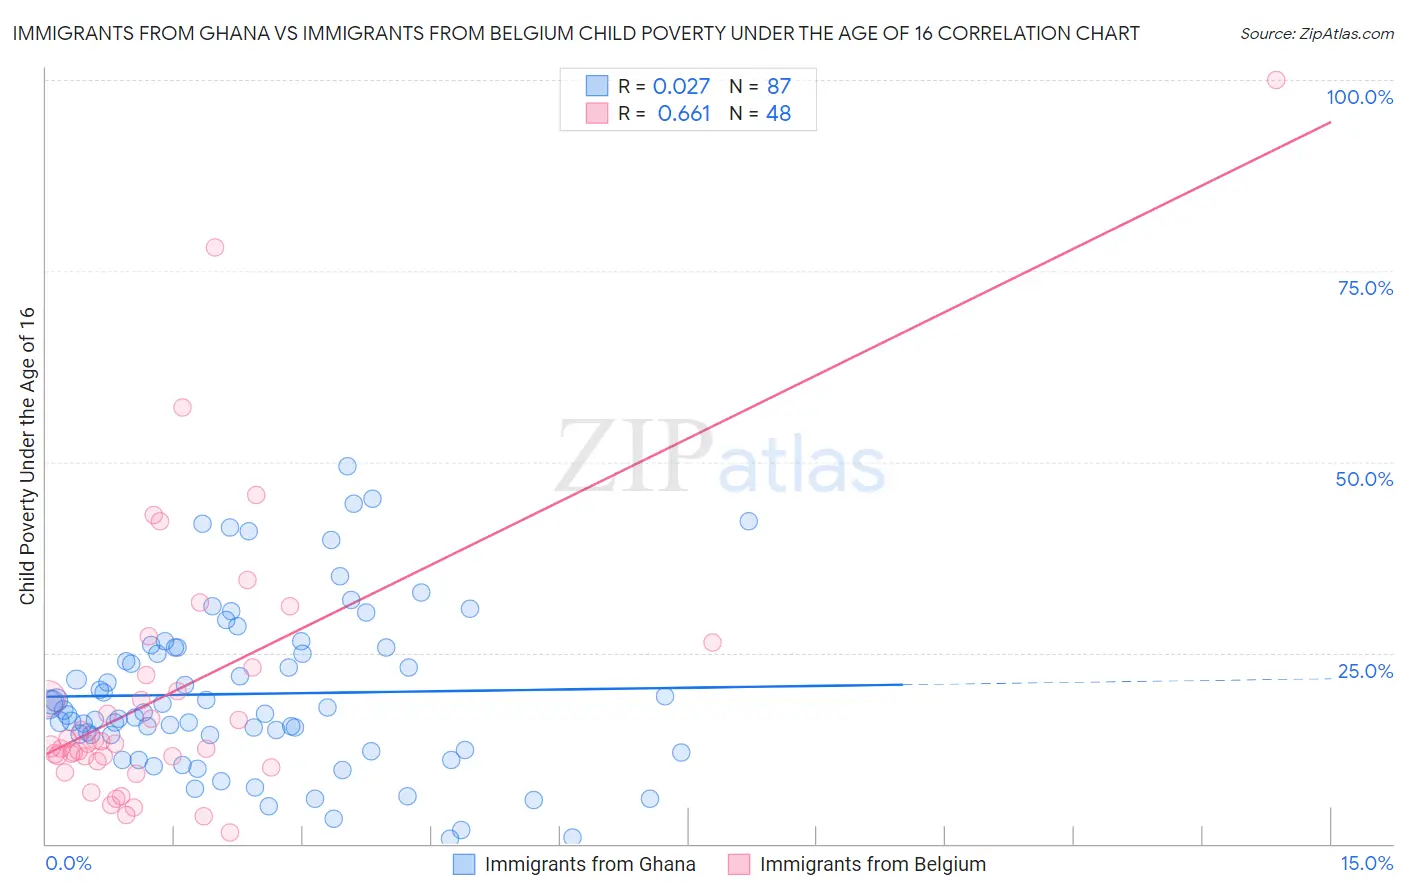 Immigrants from Ghana vs Immigrants from Belgium Child Poverty Under the Age of 16